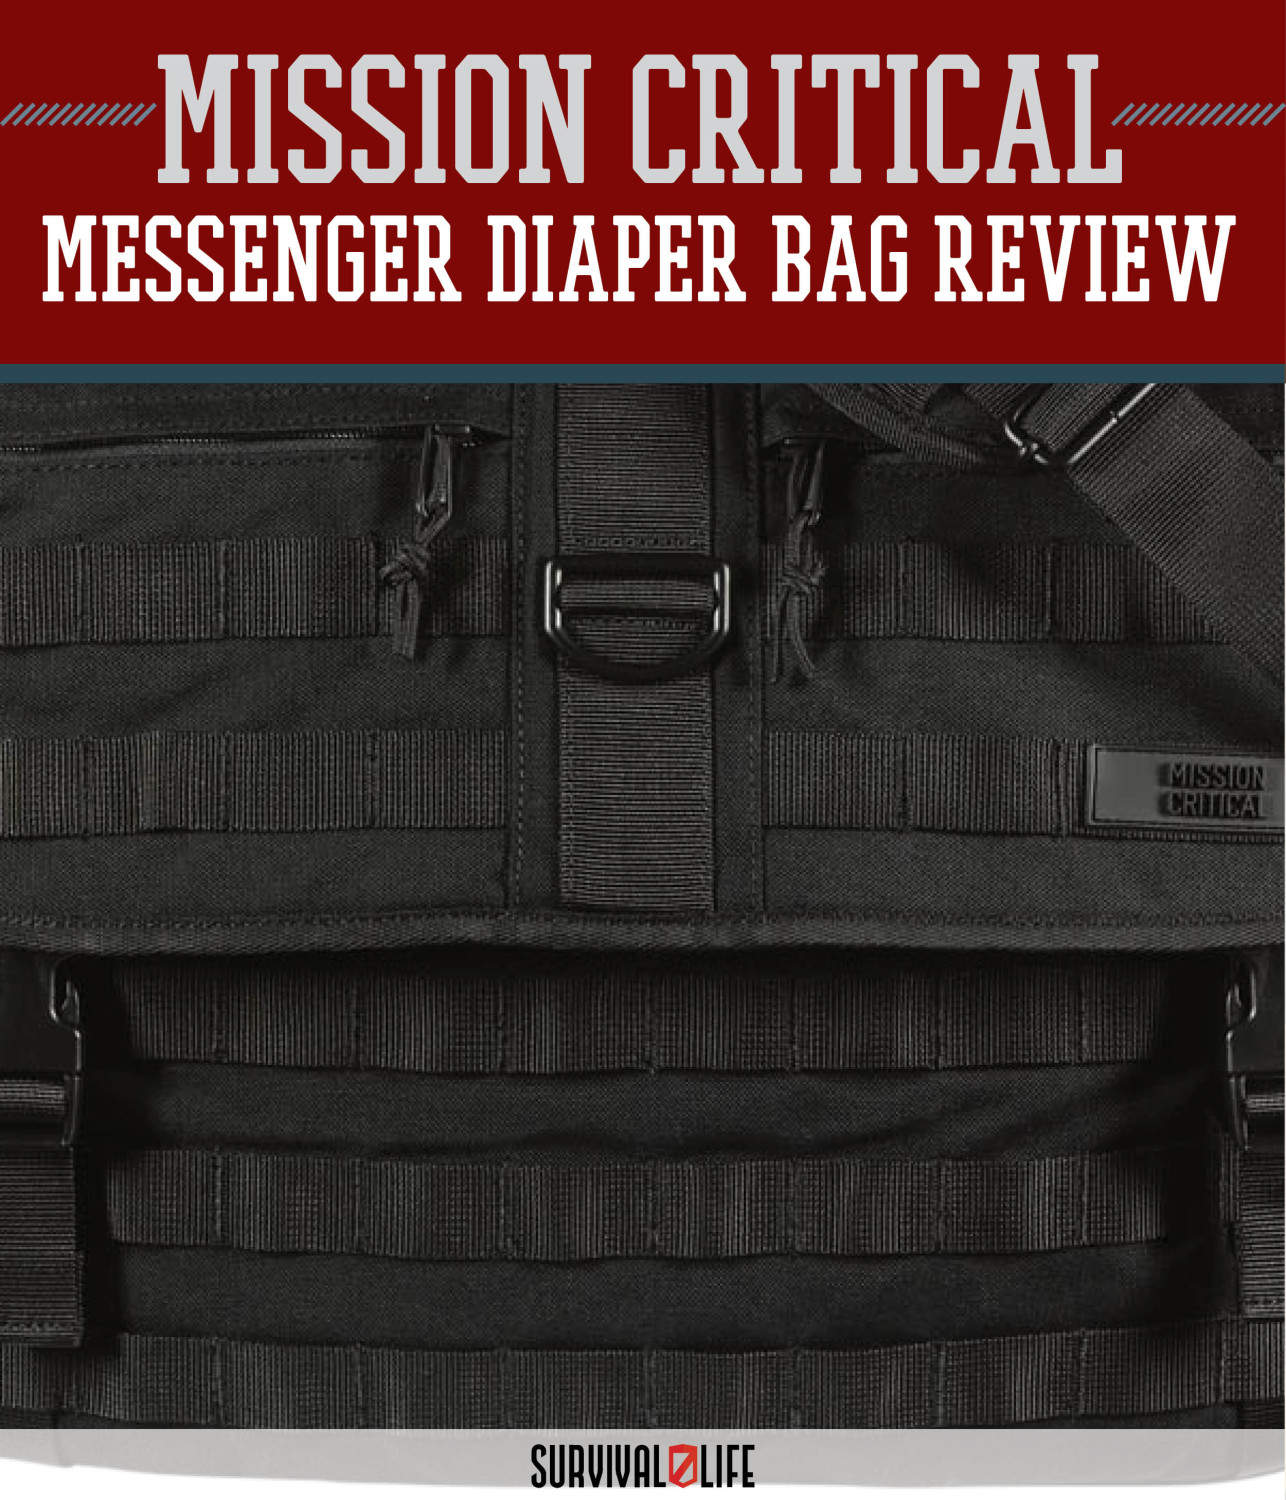 Survival Gear Review | The Mission Critical Messenger Diaper Bag by Survival Life at http://survivallife.staging.wpengine.com/2015/04/14/product-review-mission-critical-messenger-diaper-bag